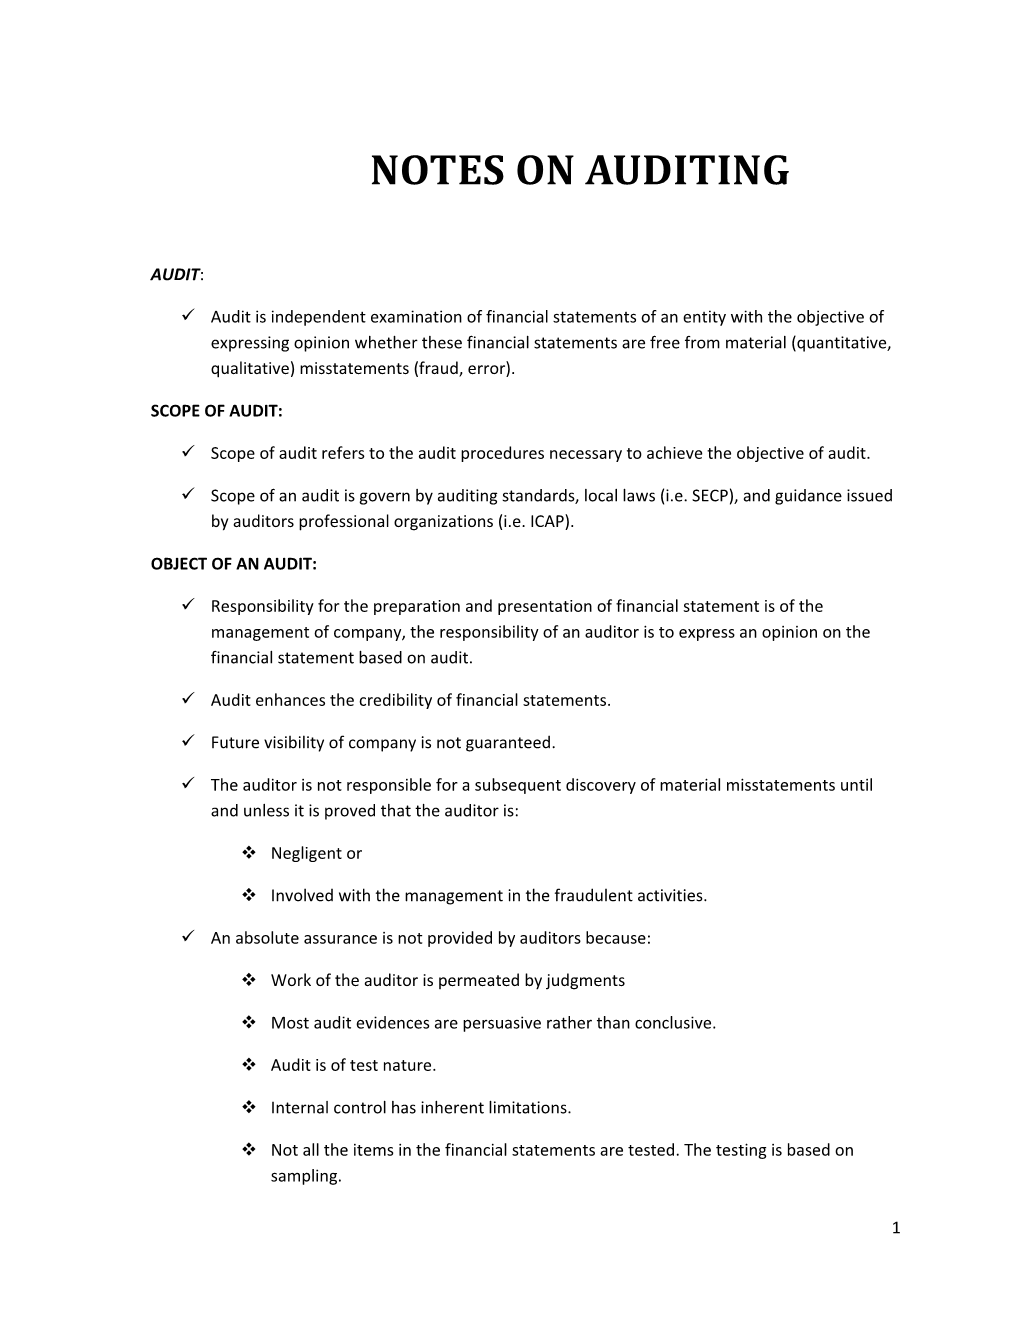 Notes on Auditing